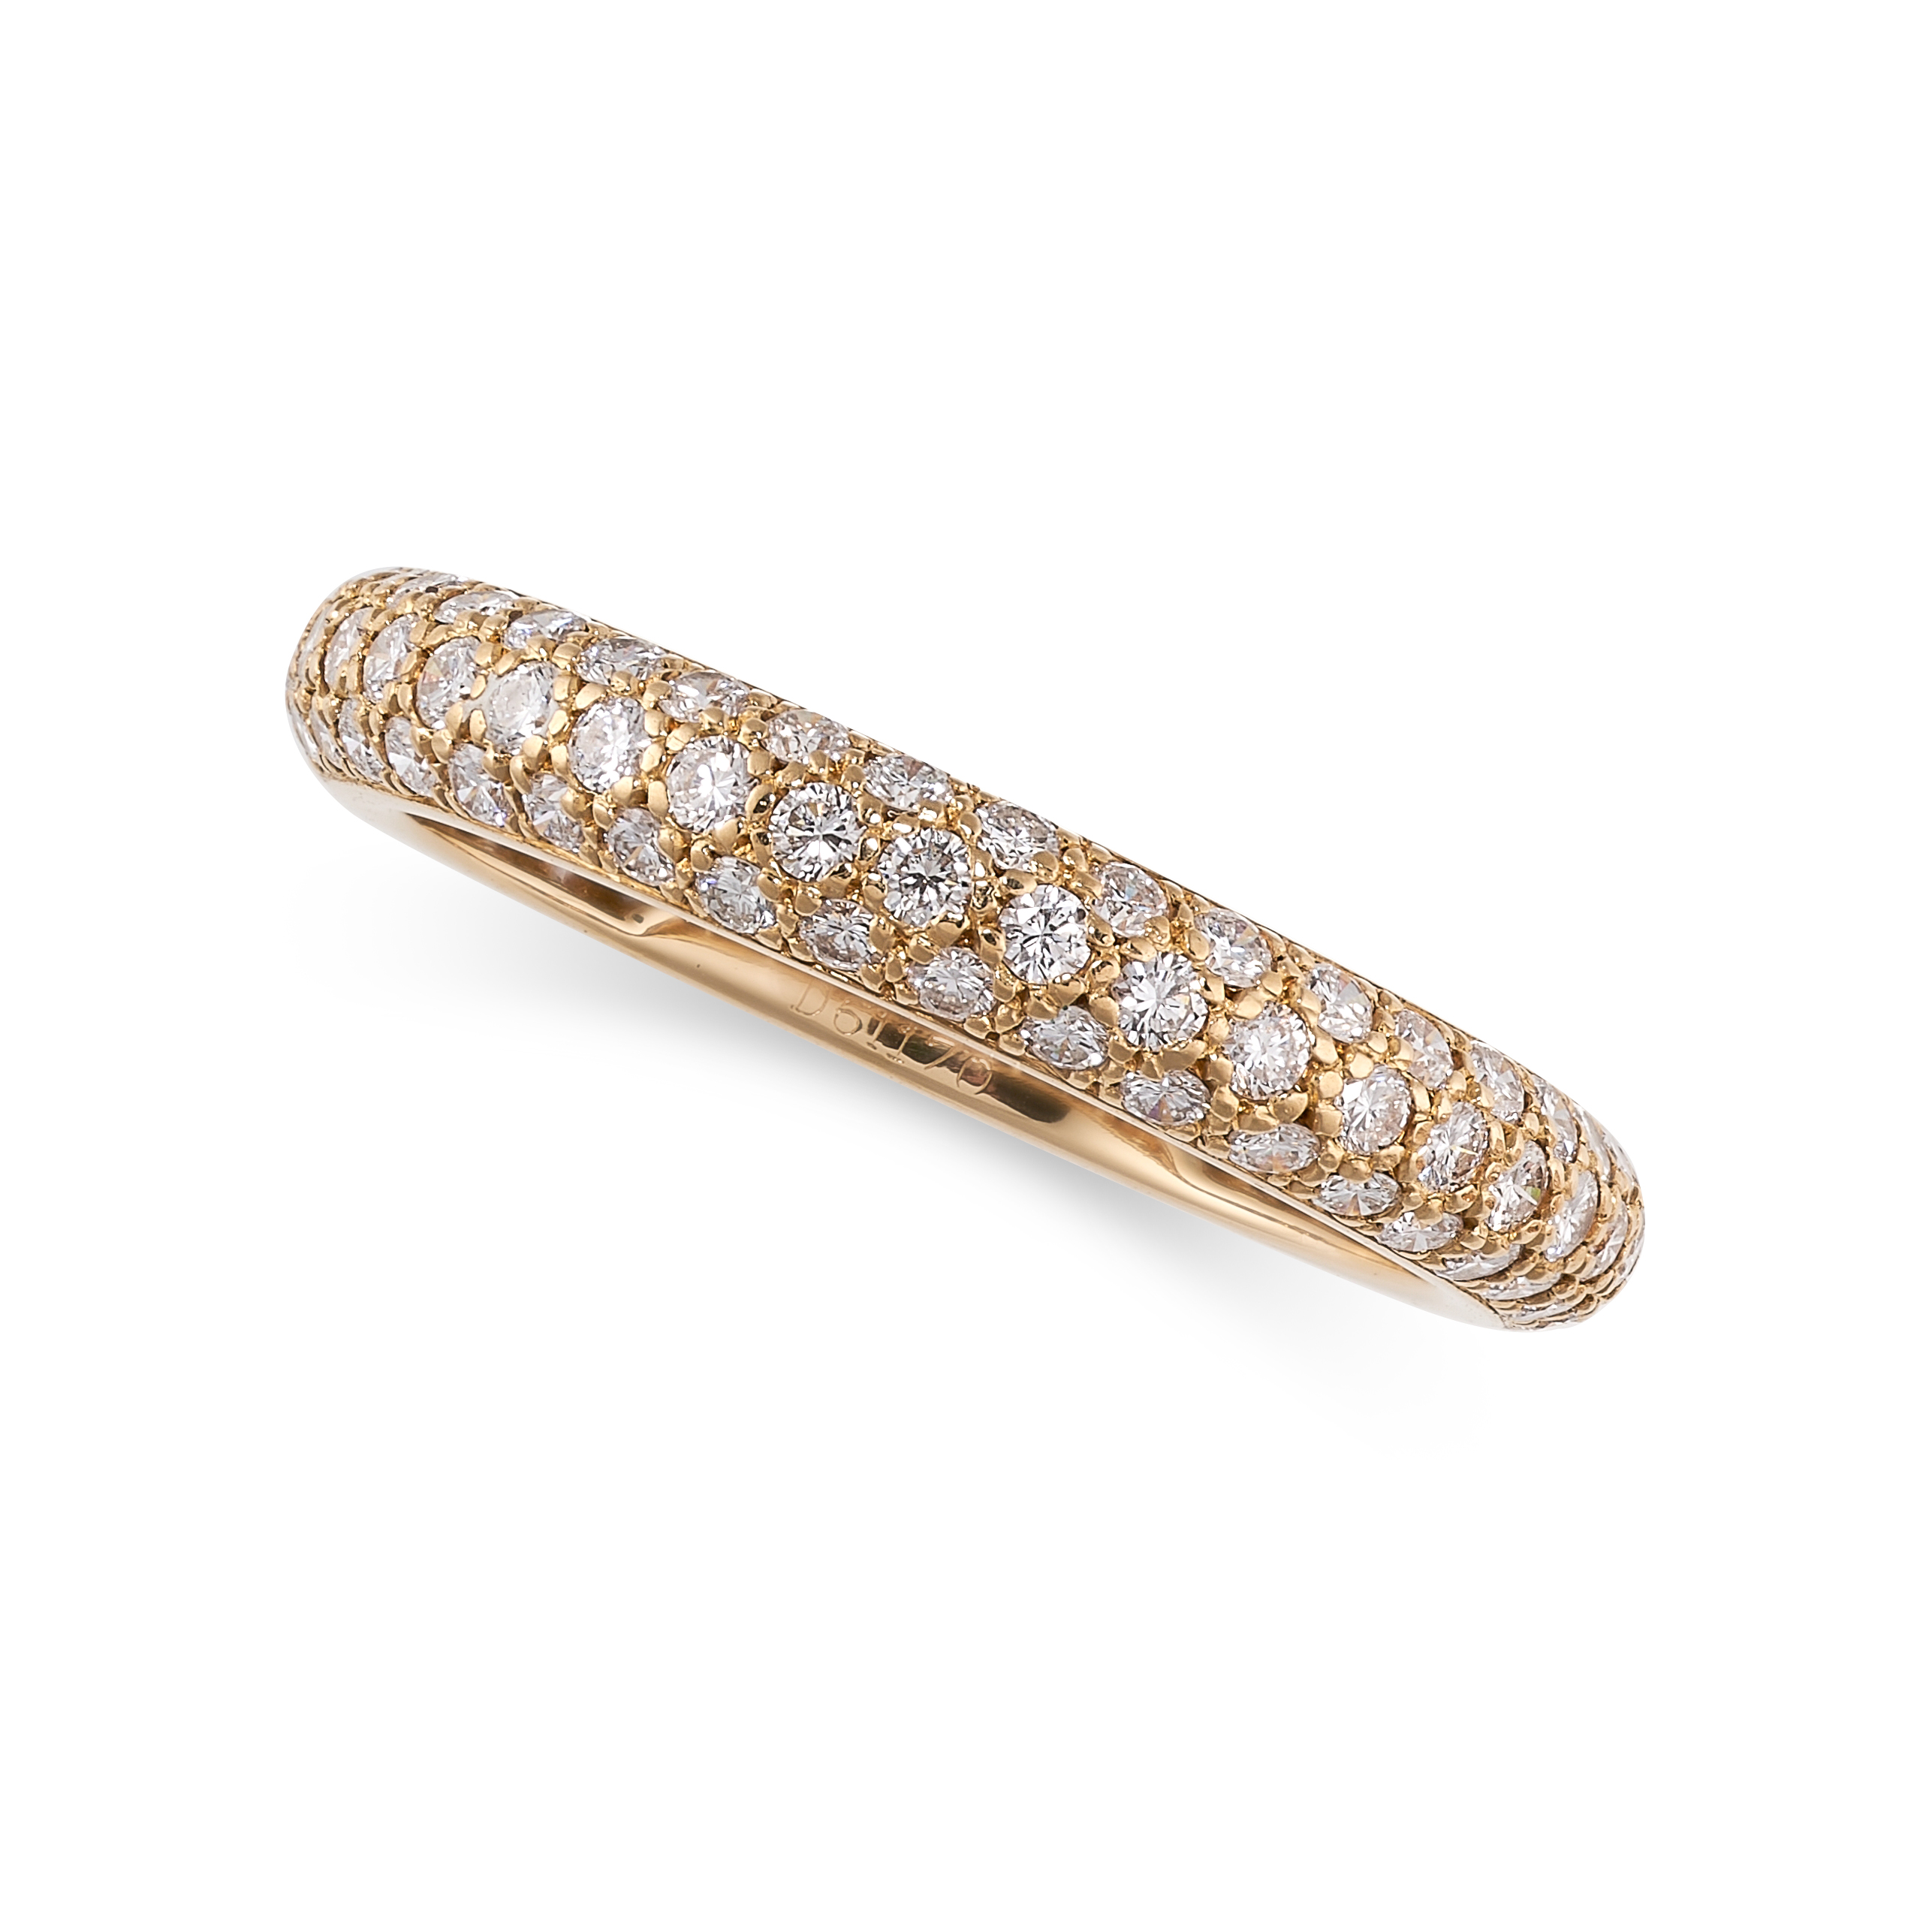 A DIAMOND ETERNITY RING, CARTIER in 18ct yellow gold, the band set all around with three rows of - Image 2 of 2